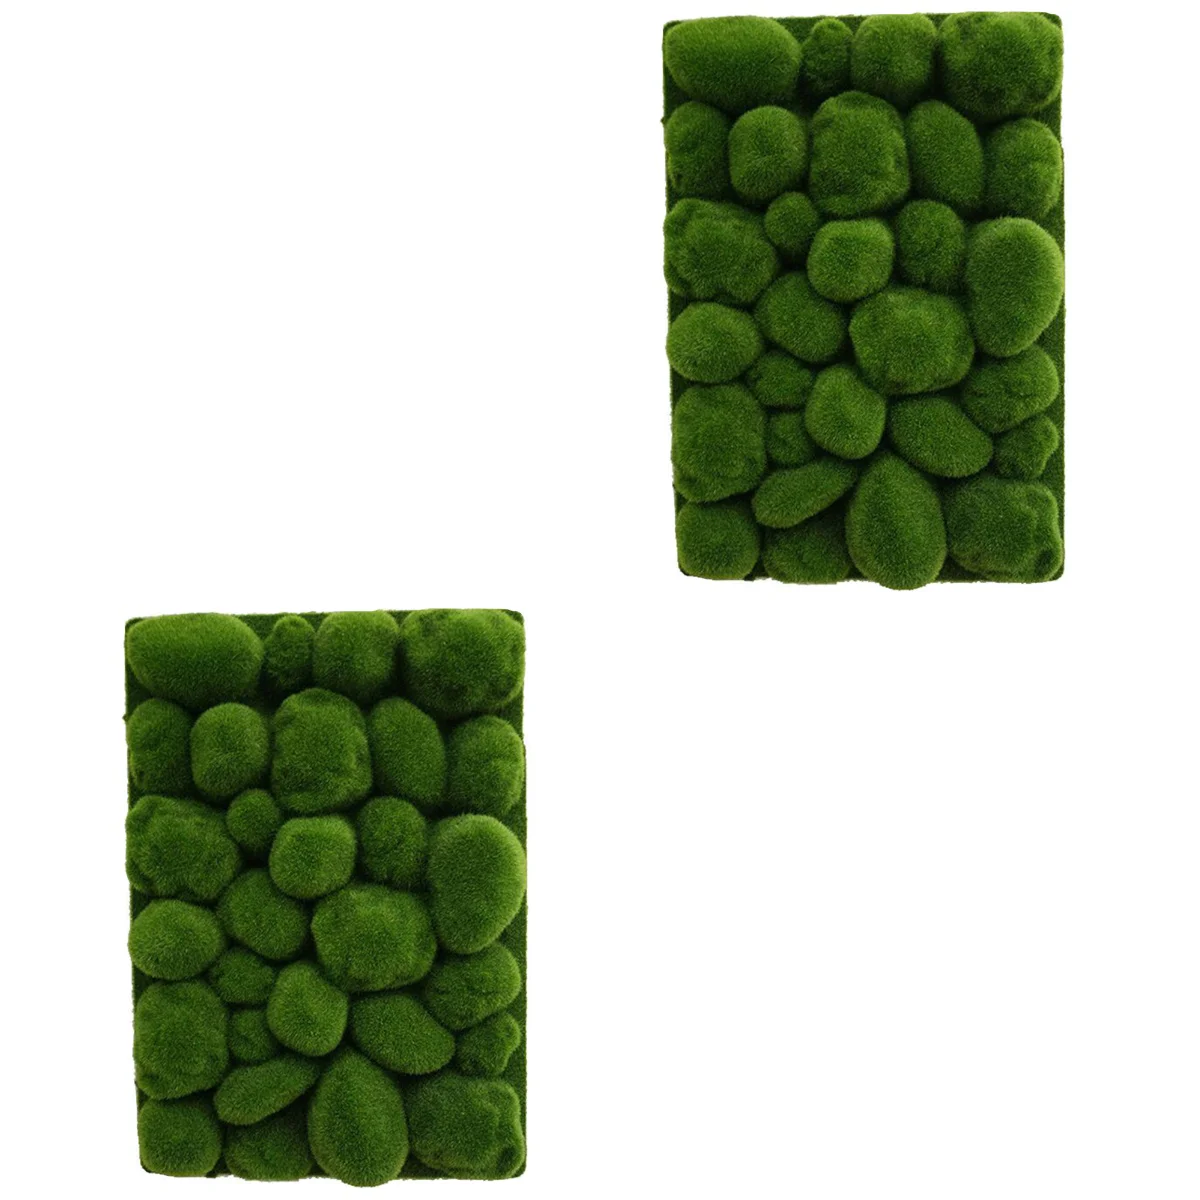 

2 PCS Simulated Moss Decoration Micro Landscape Artificial Turf Grass Fake Decorations Accessory Decorate